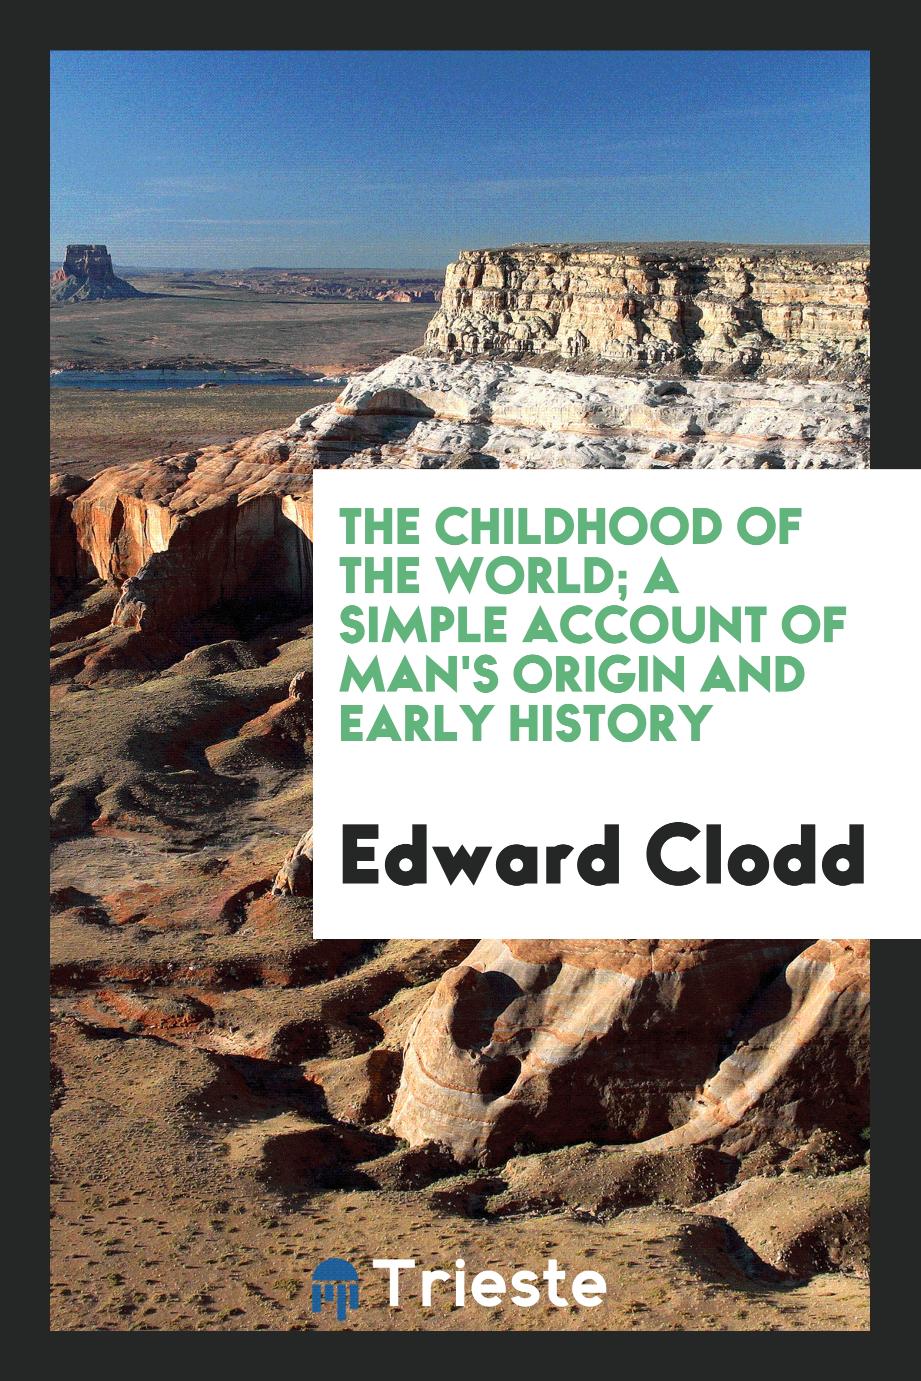 The childhood of the world; a simple account of man's origin and early history